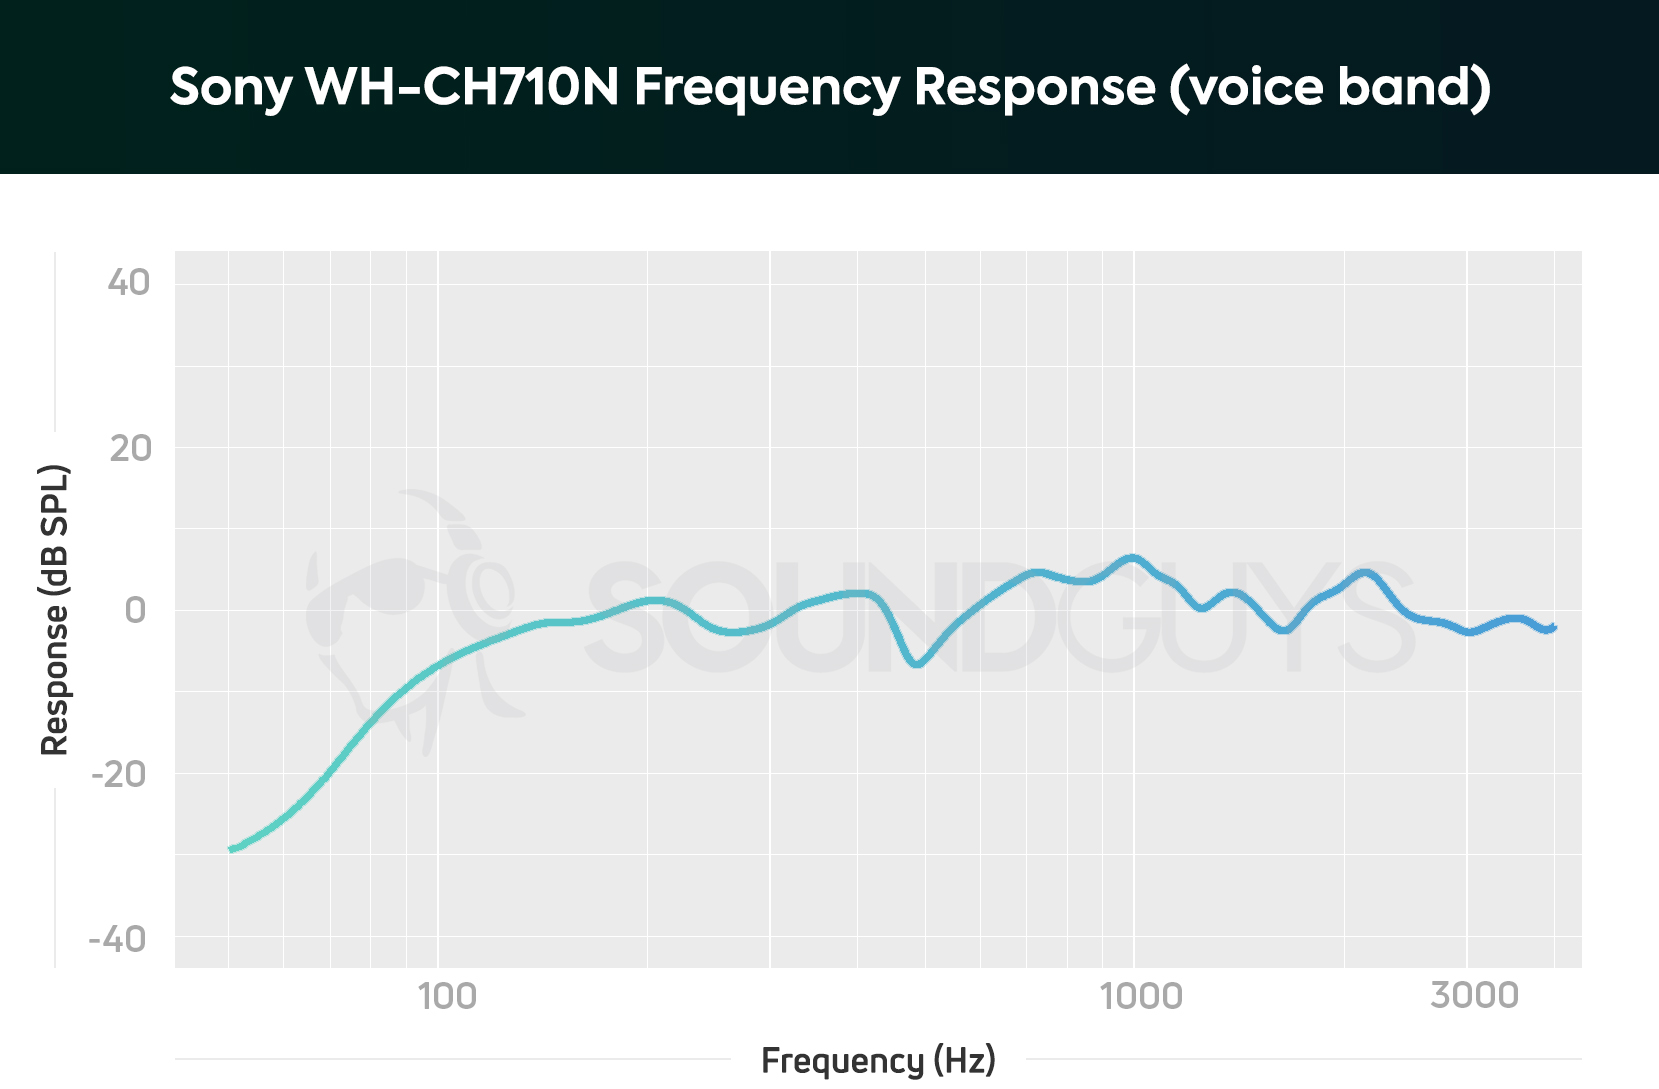 Vocal frequency response graph of the Sony WH-CH710N showing sharp drop-off under about 200Hz.